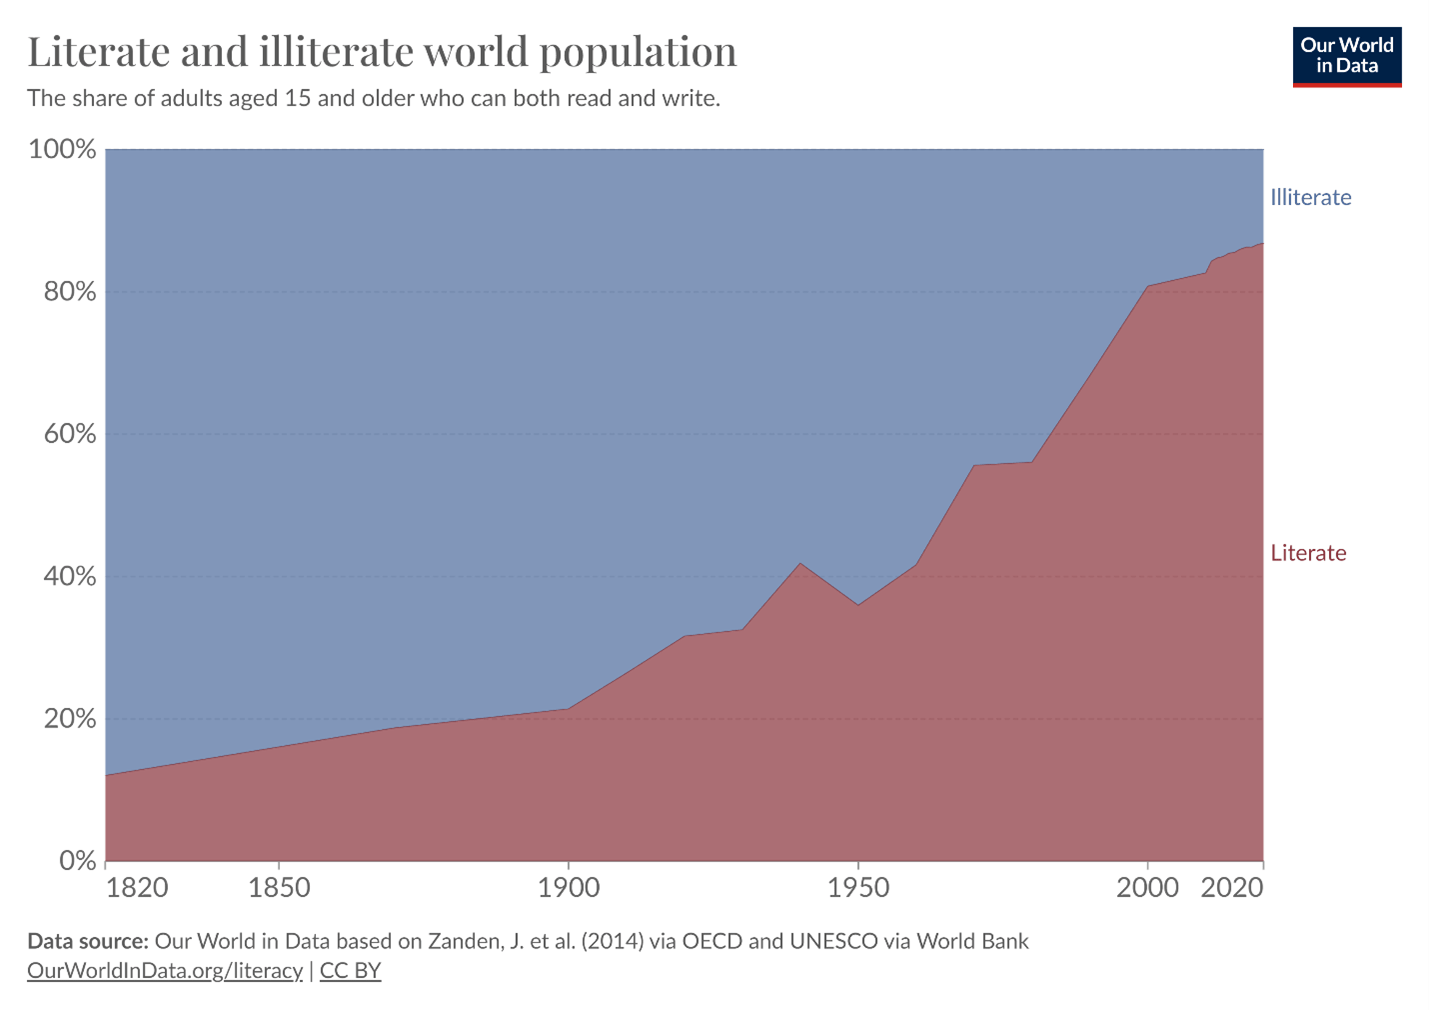 A graph showing the proportion of the world population that is literate vs. illiterate over time.